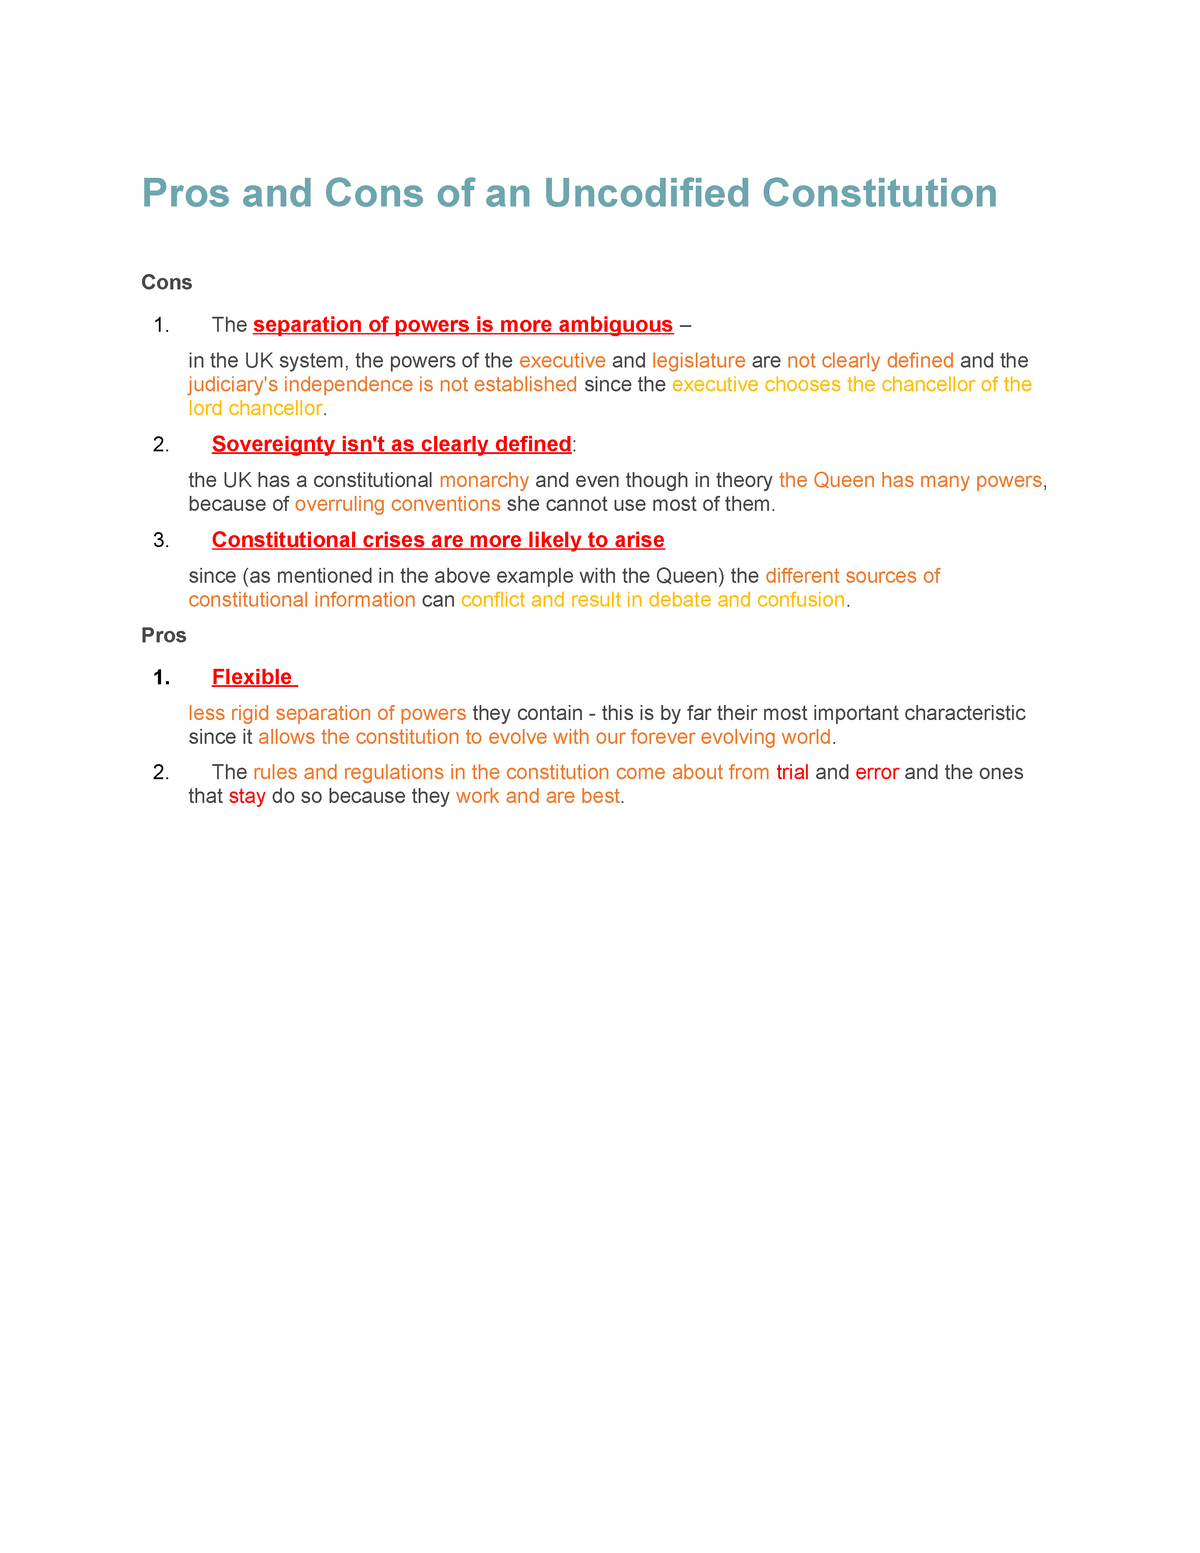 essay for codified constitution